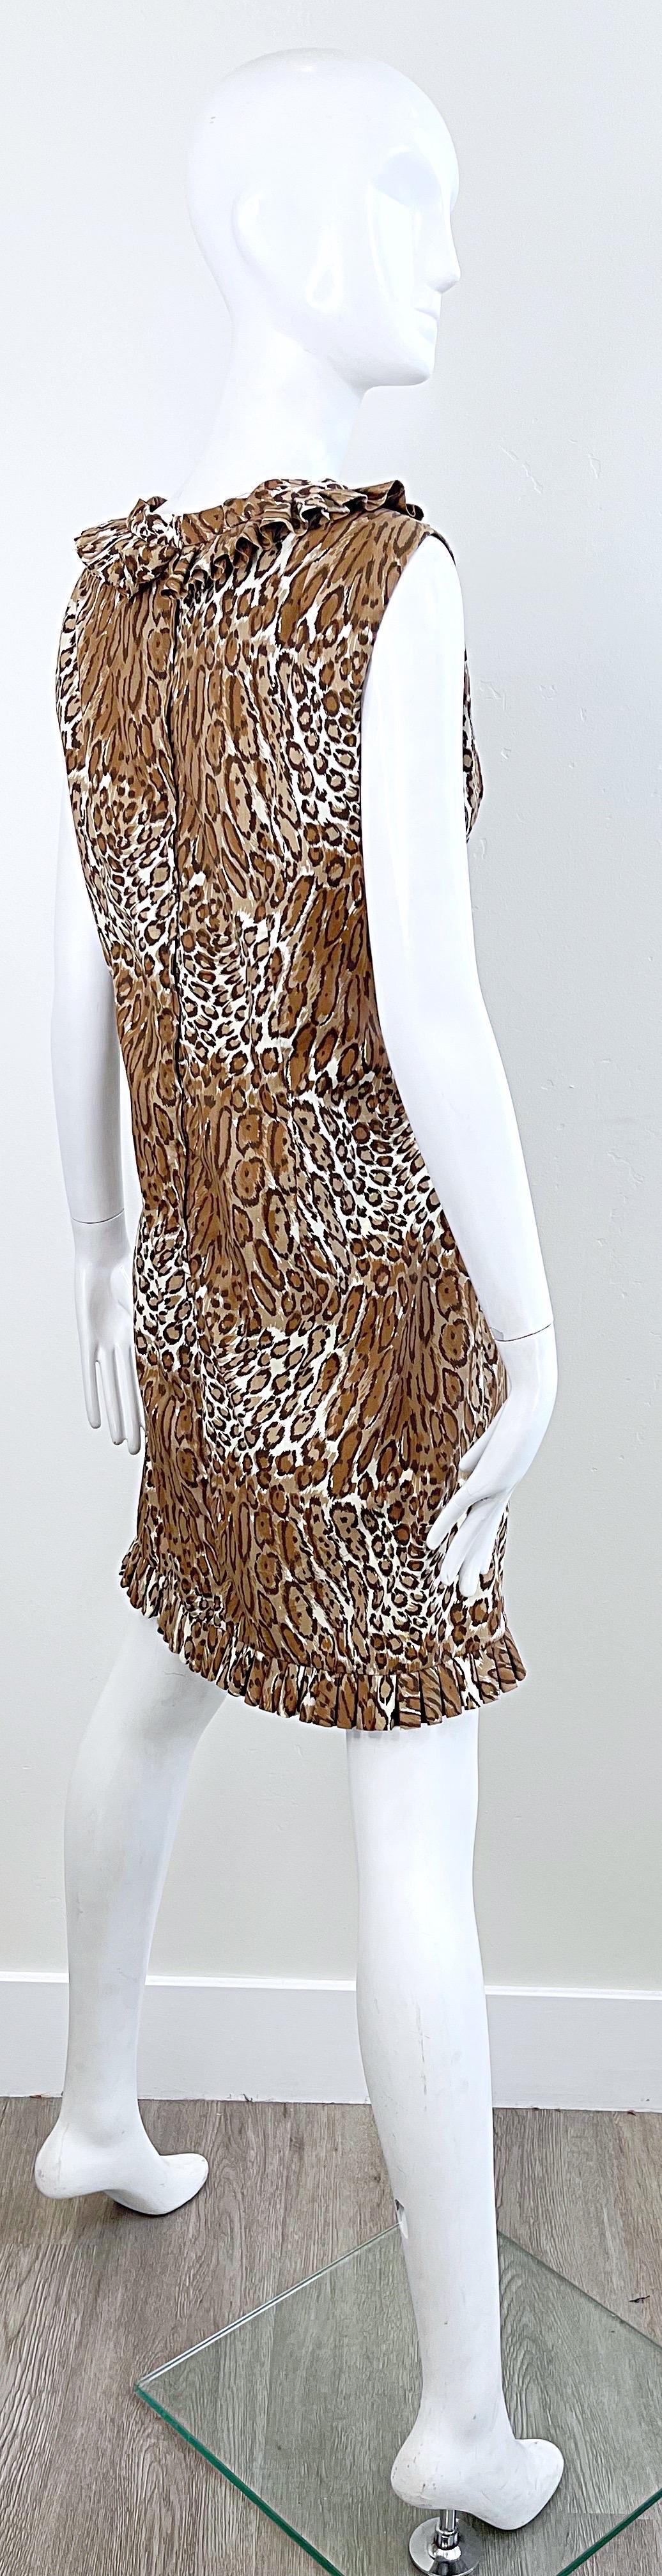 1960s Chic Leopard Cheetah Animal Abstract Print Cotton Vintage 60s Shift Dress 7